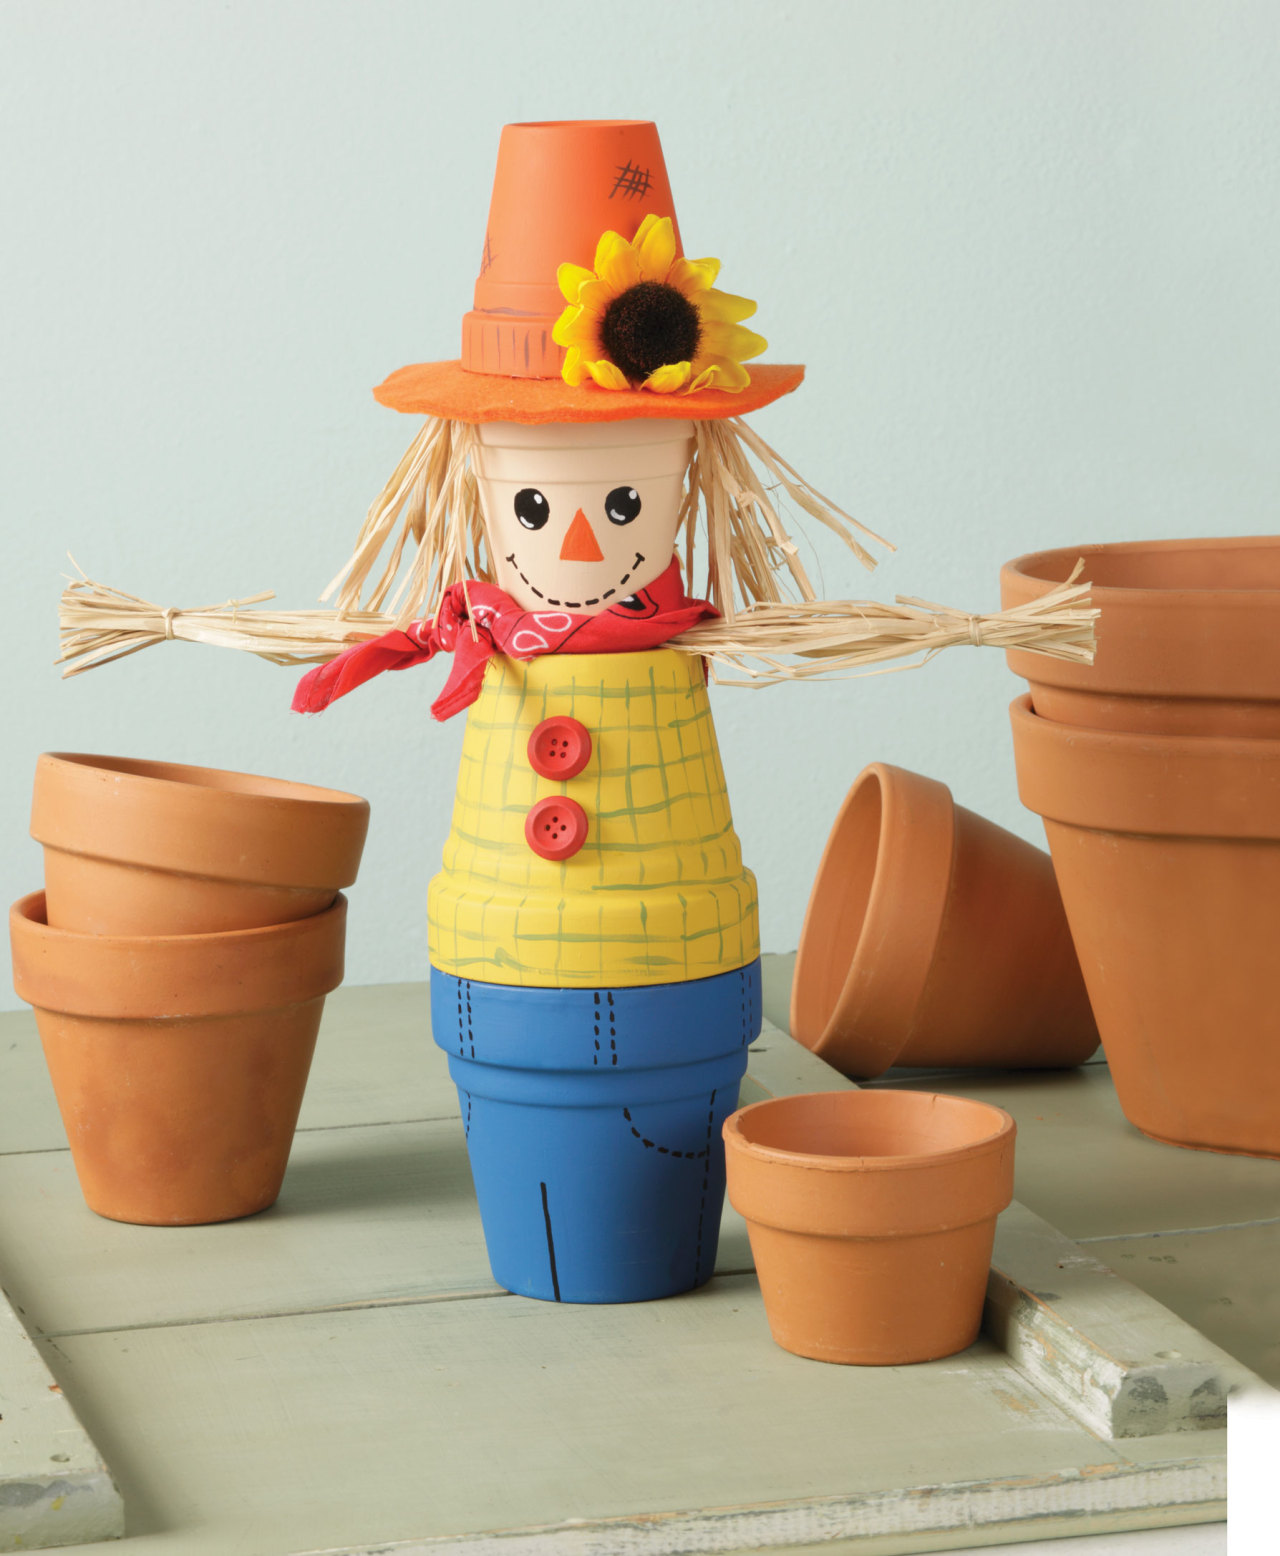 Clay Pot Scarecrow
These steps will help you complete your projects
Supplies - Get the job done right.
 two 4" dia. clay pots
 two 3" dia. clay pots
 acrylic paint (orange, peach, yellow, green, blue, red, brown, white, & black)
 two 3/4“ dia....